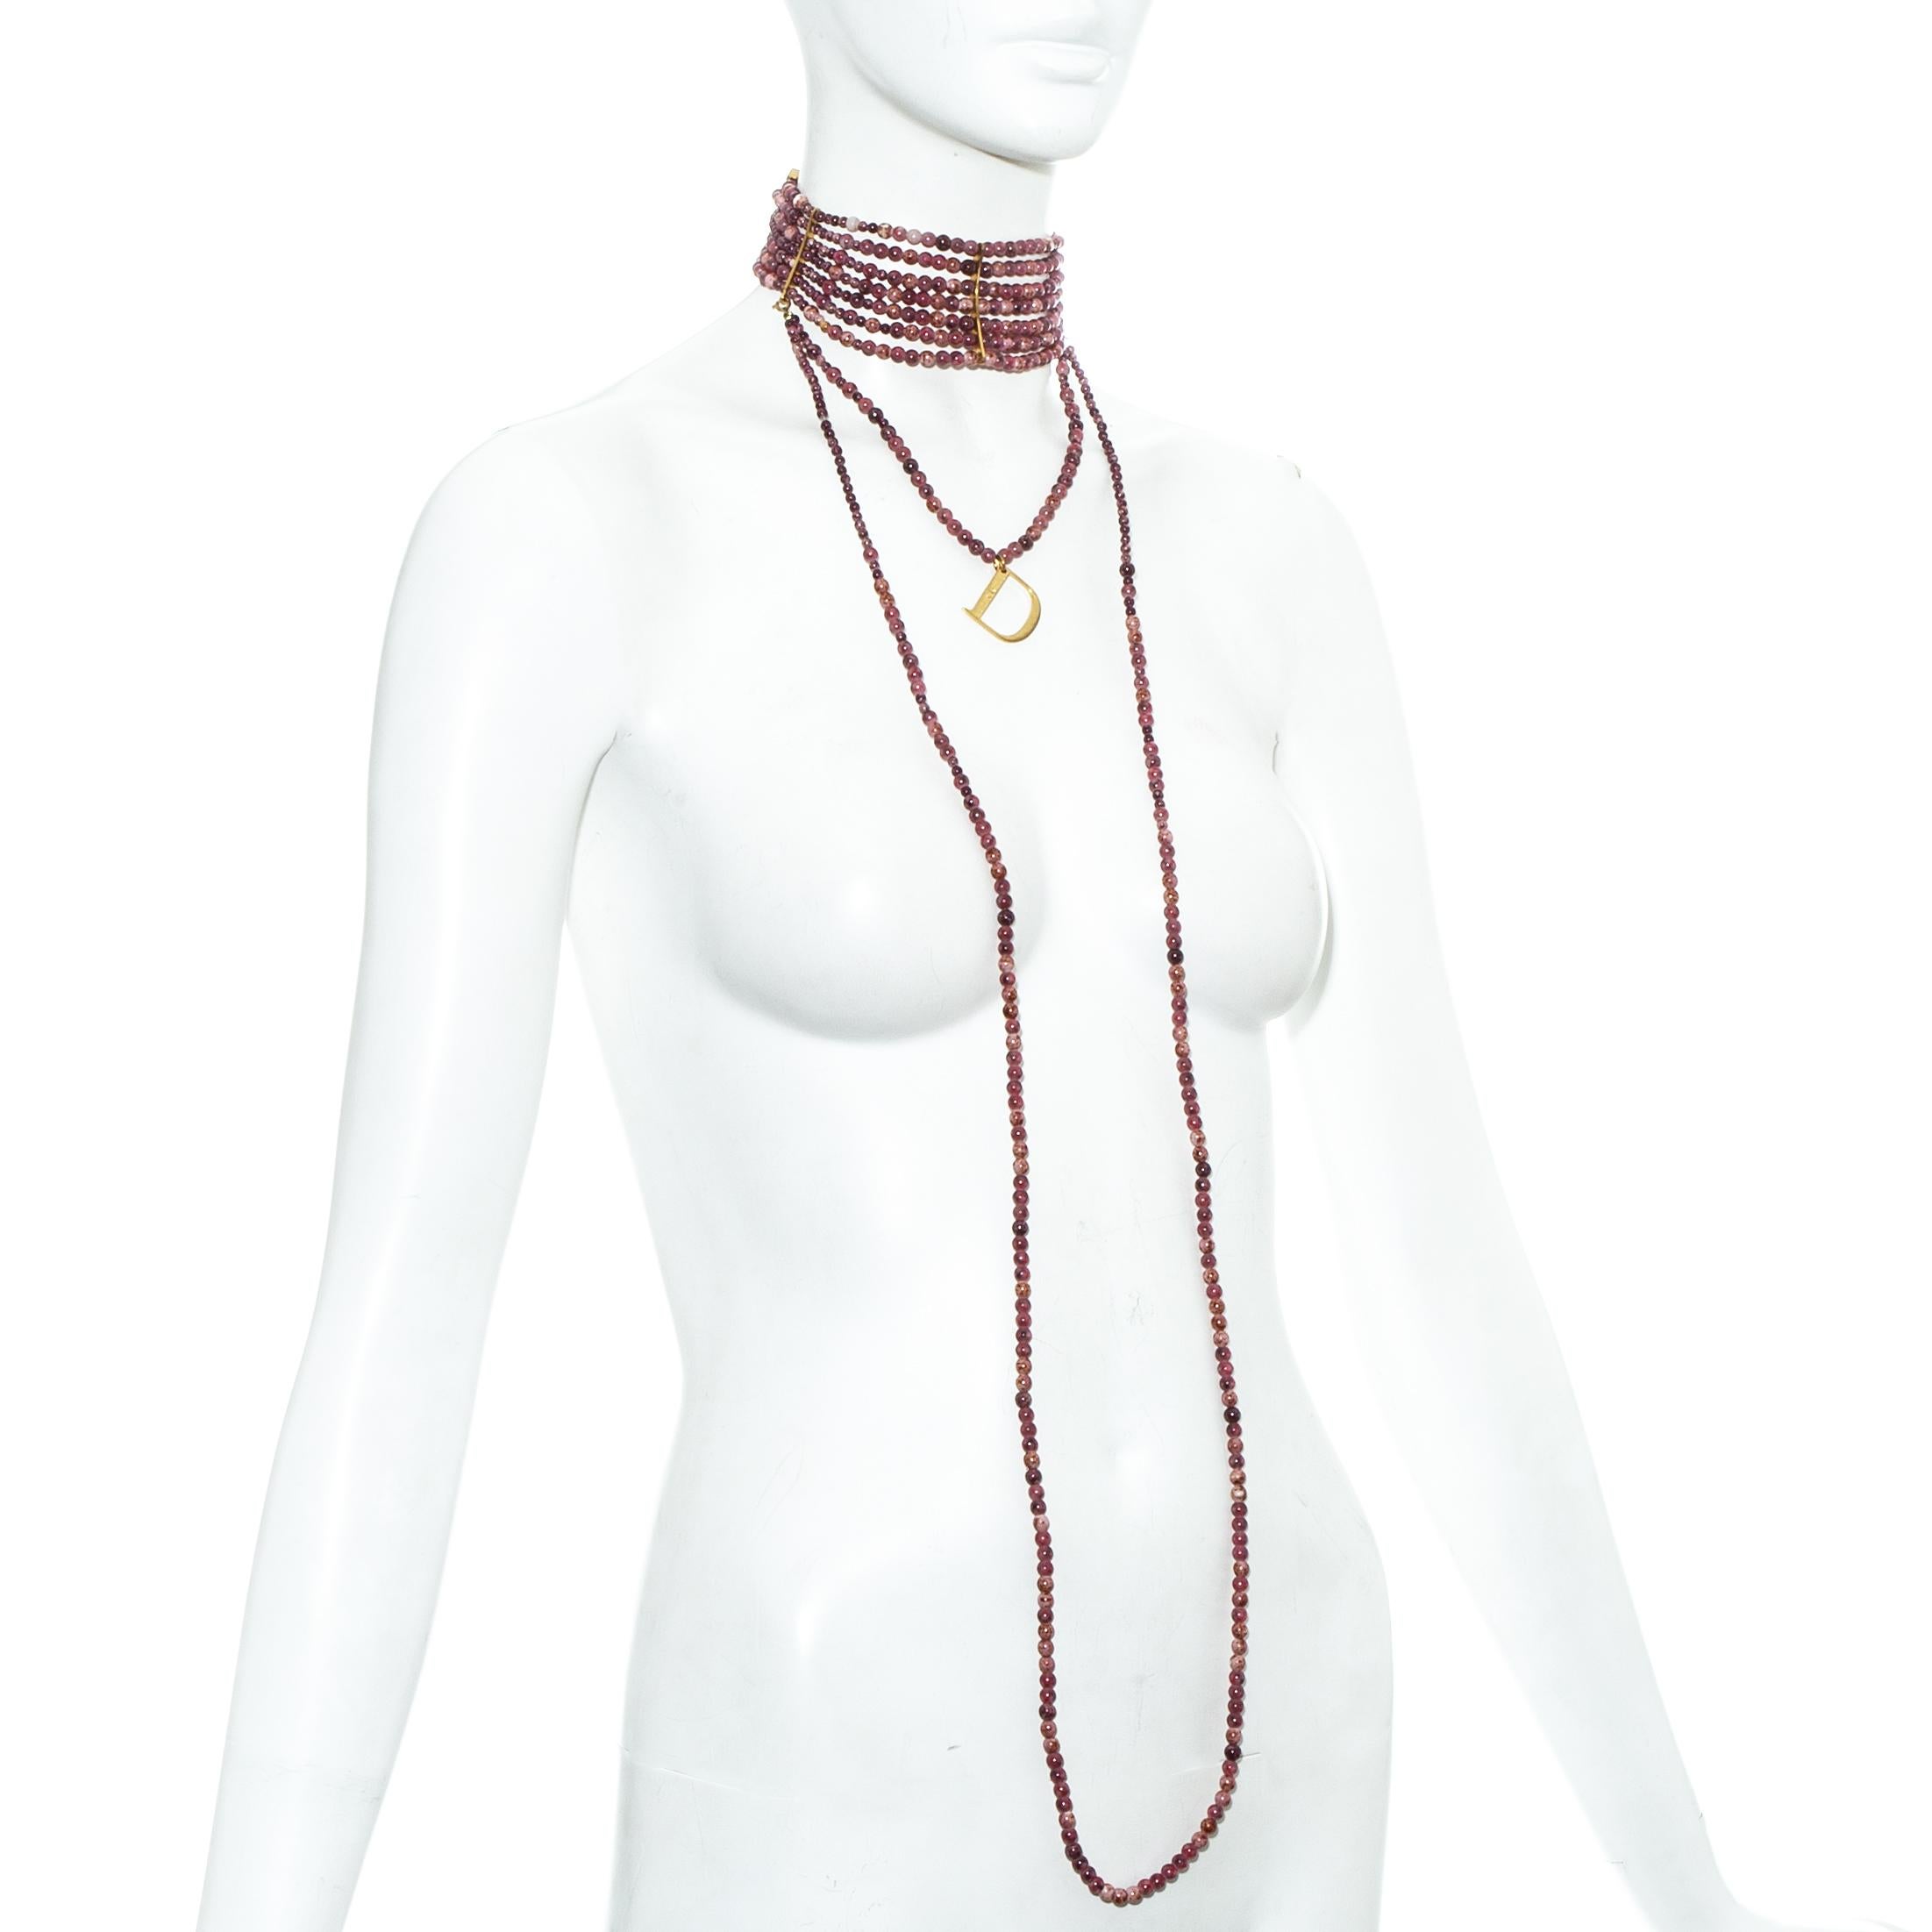 Women's Christian Dior by John Galliano pink marble glass bead choker necklace, fw 1999